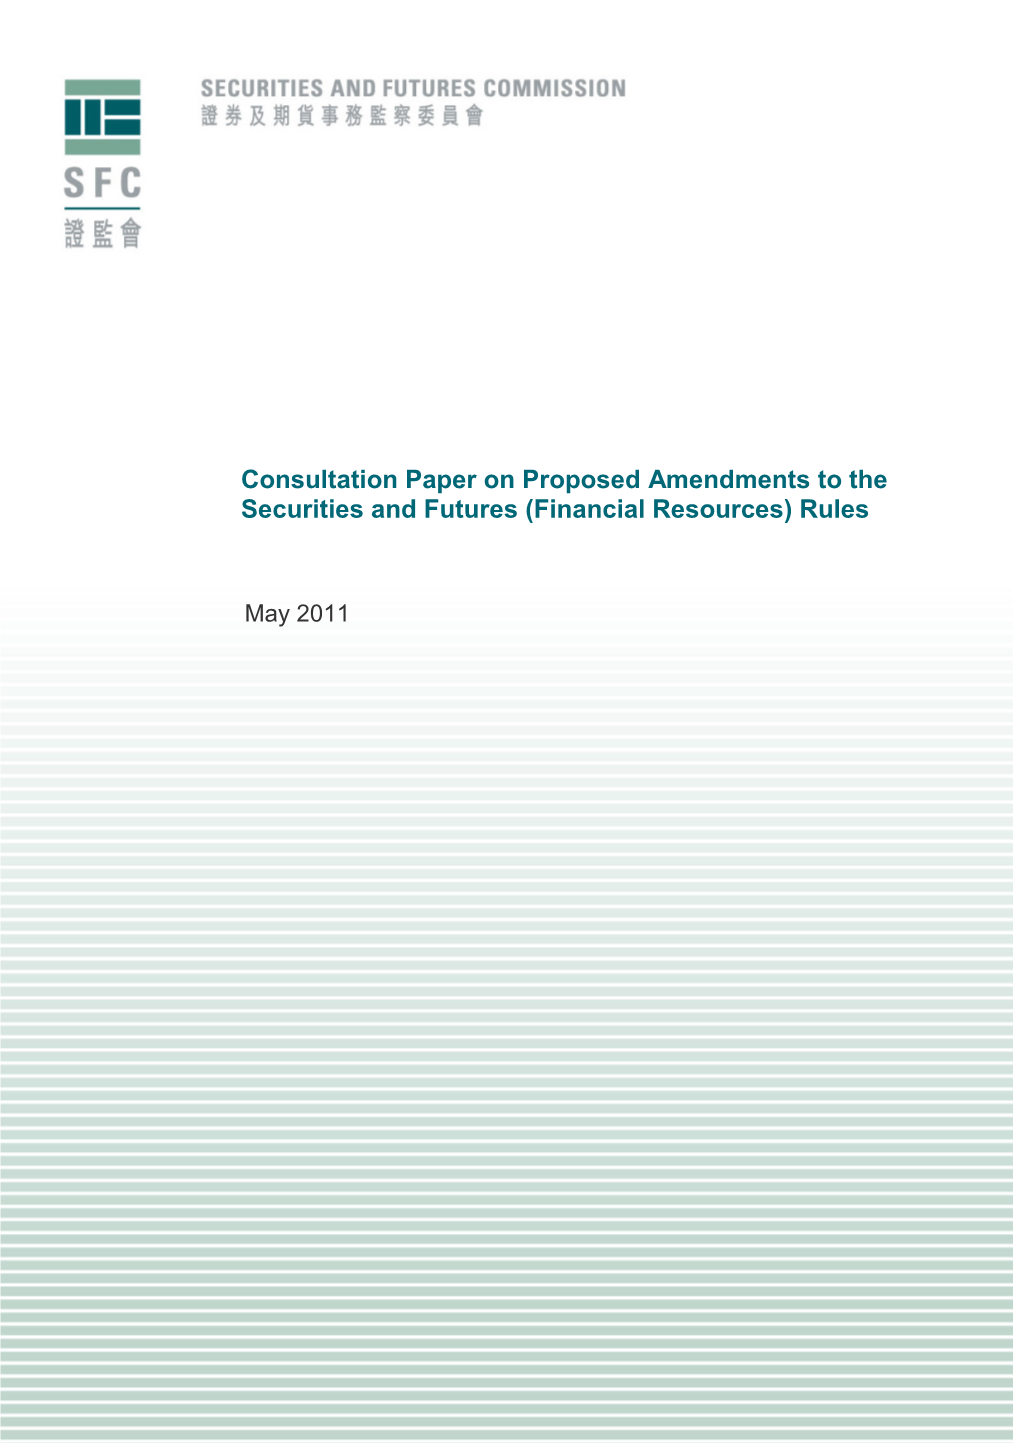 Consultation Paper on Proposed Amendments to the Securities and Futures (Financial Resources) Rules